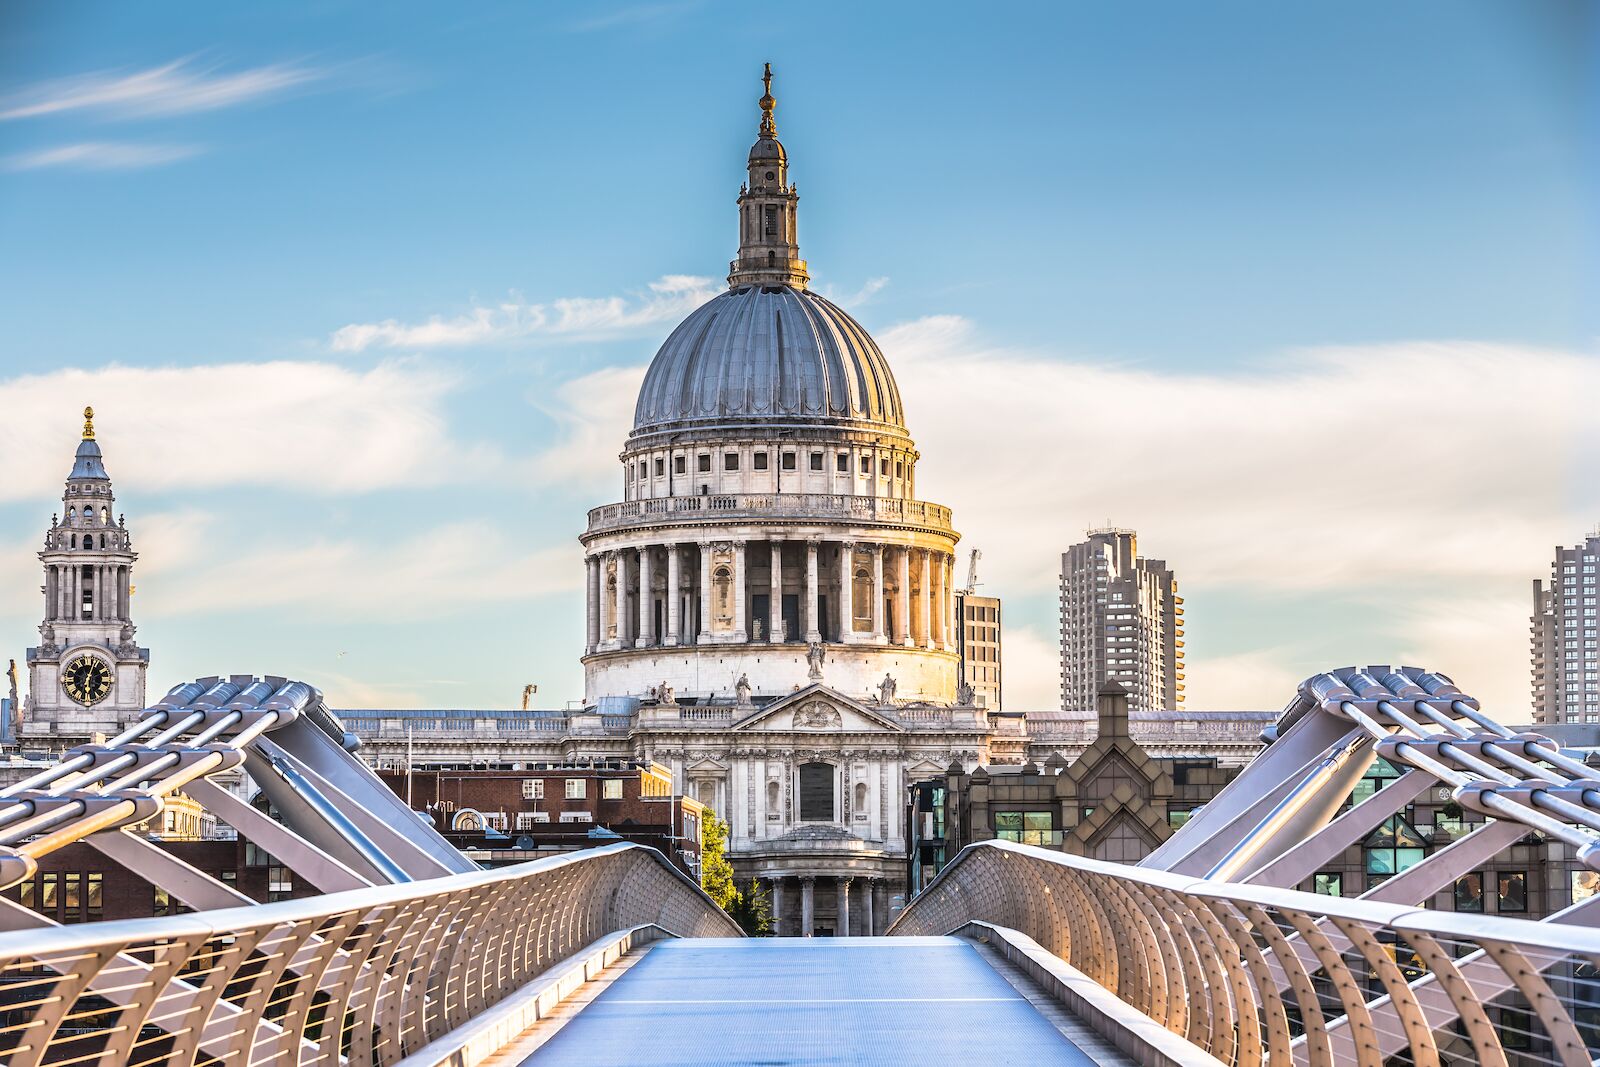 St. Paul's Cathedral as seen from the Millennium Bridge in London